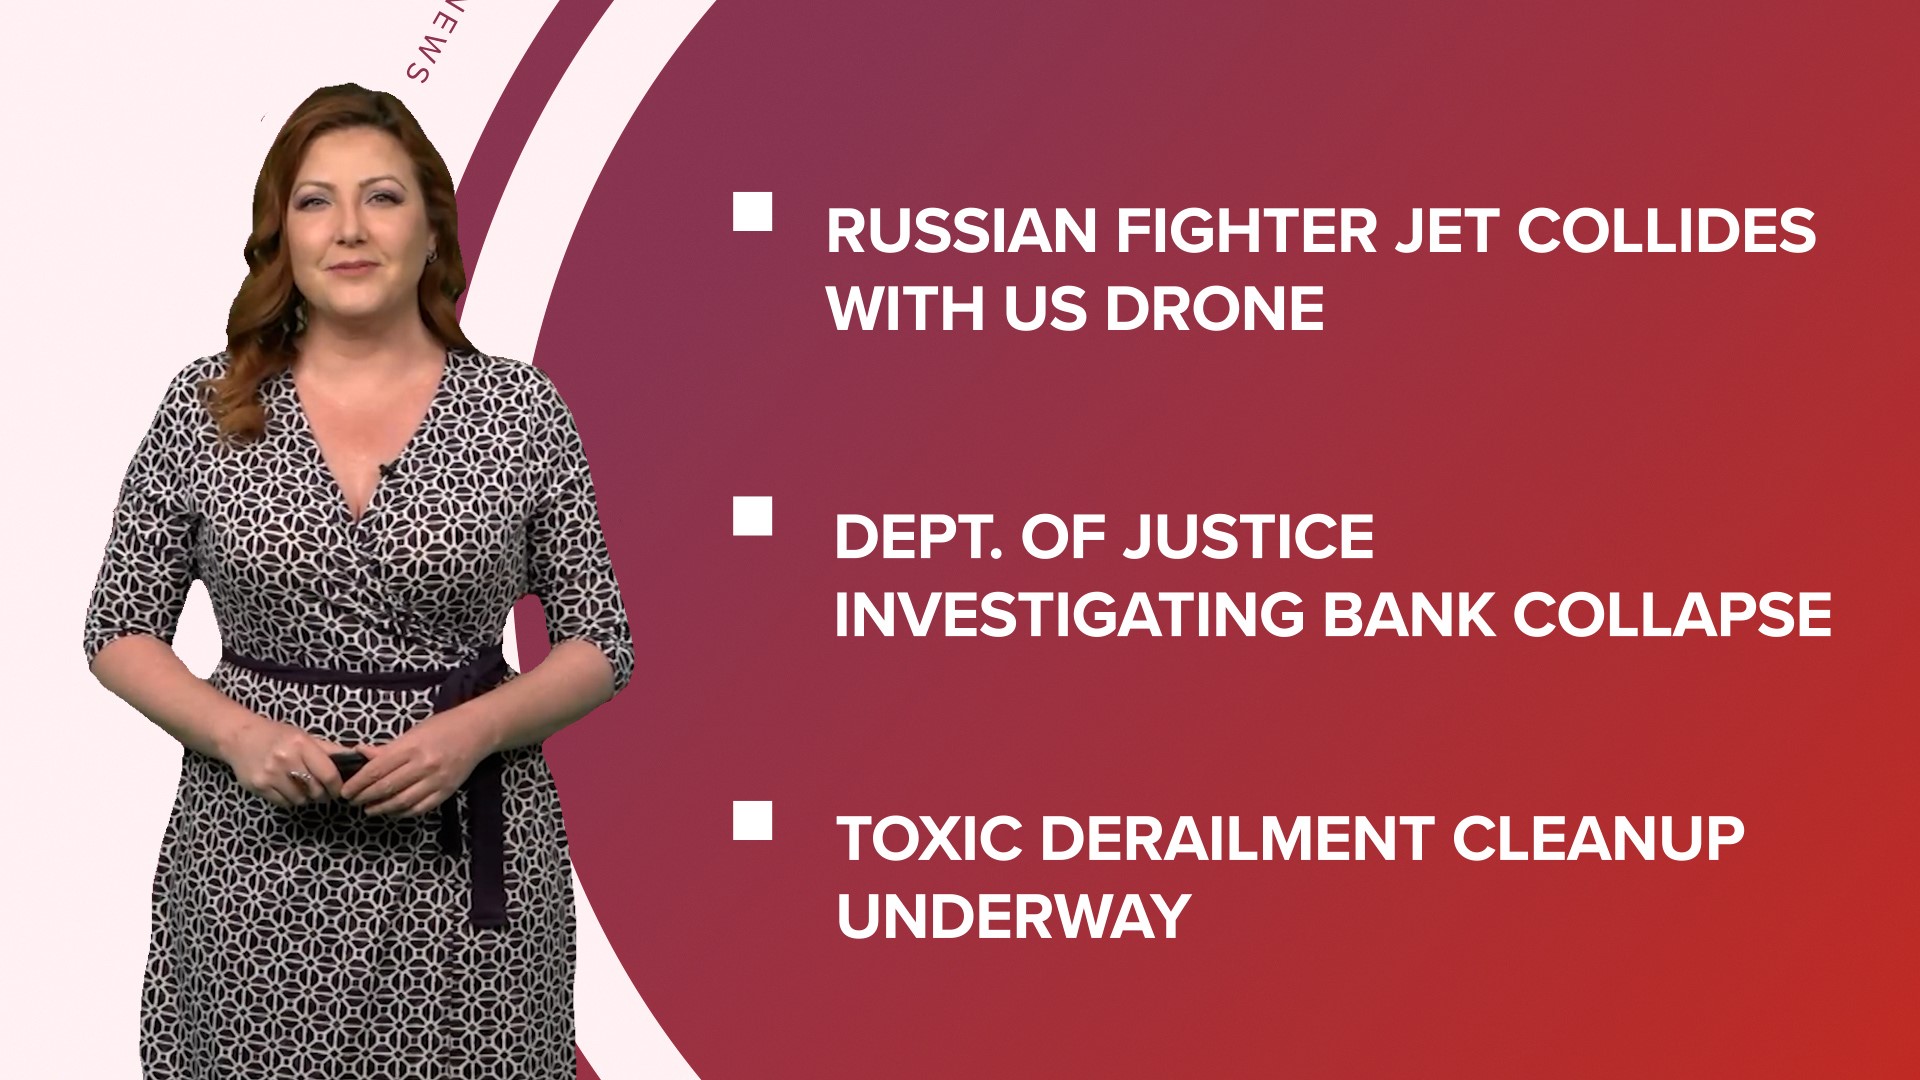 A look at what is happening in the news from Russian jets forcing down a US drone to counterfeit car seat concerns and Ohio suing Norfolk Southern over derailment.